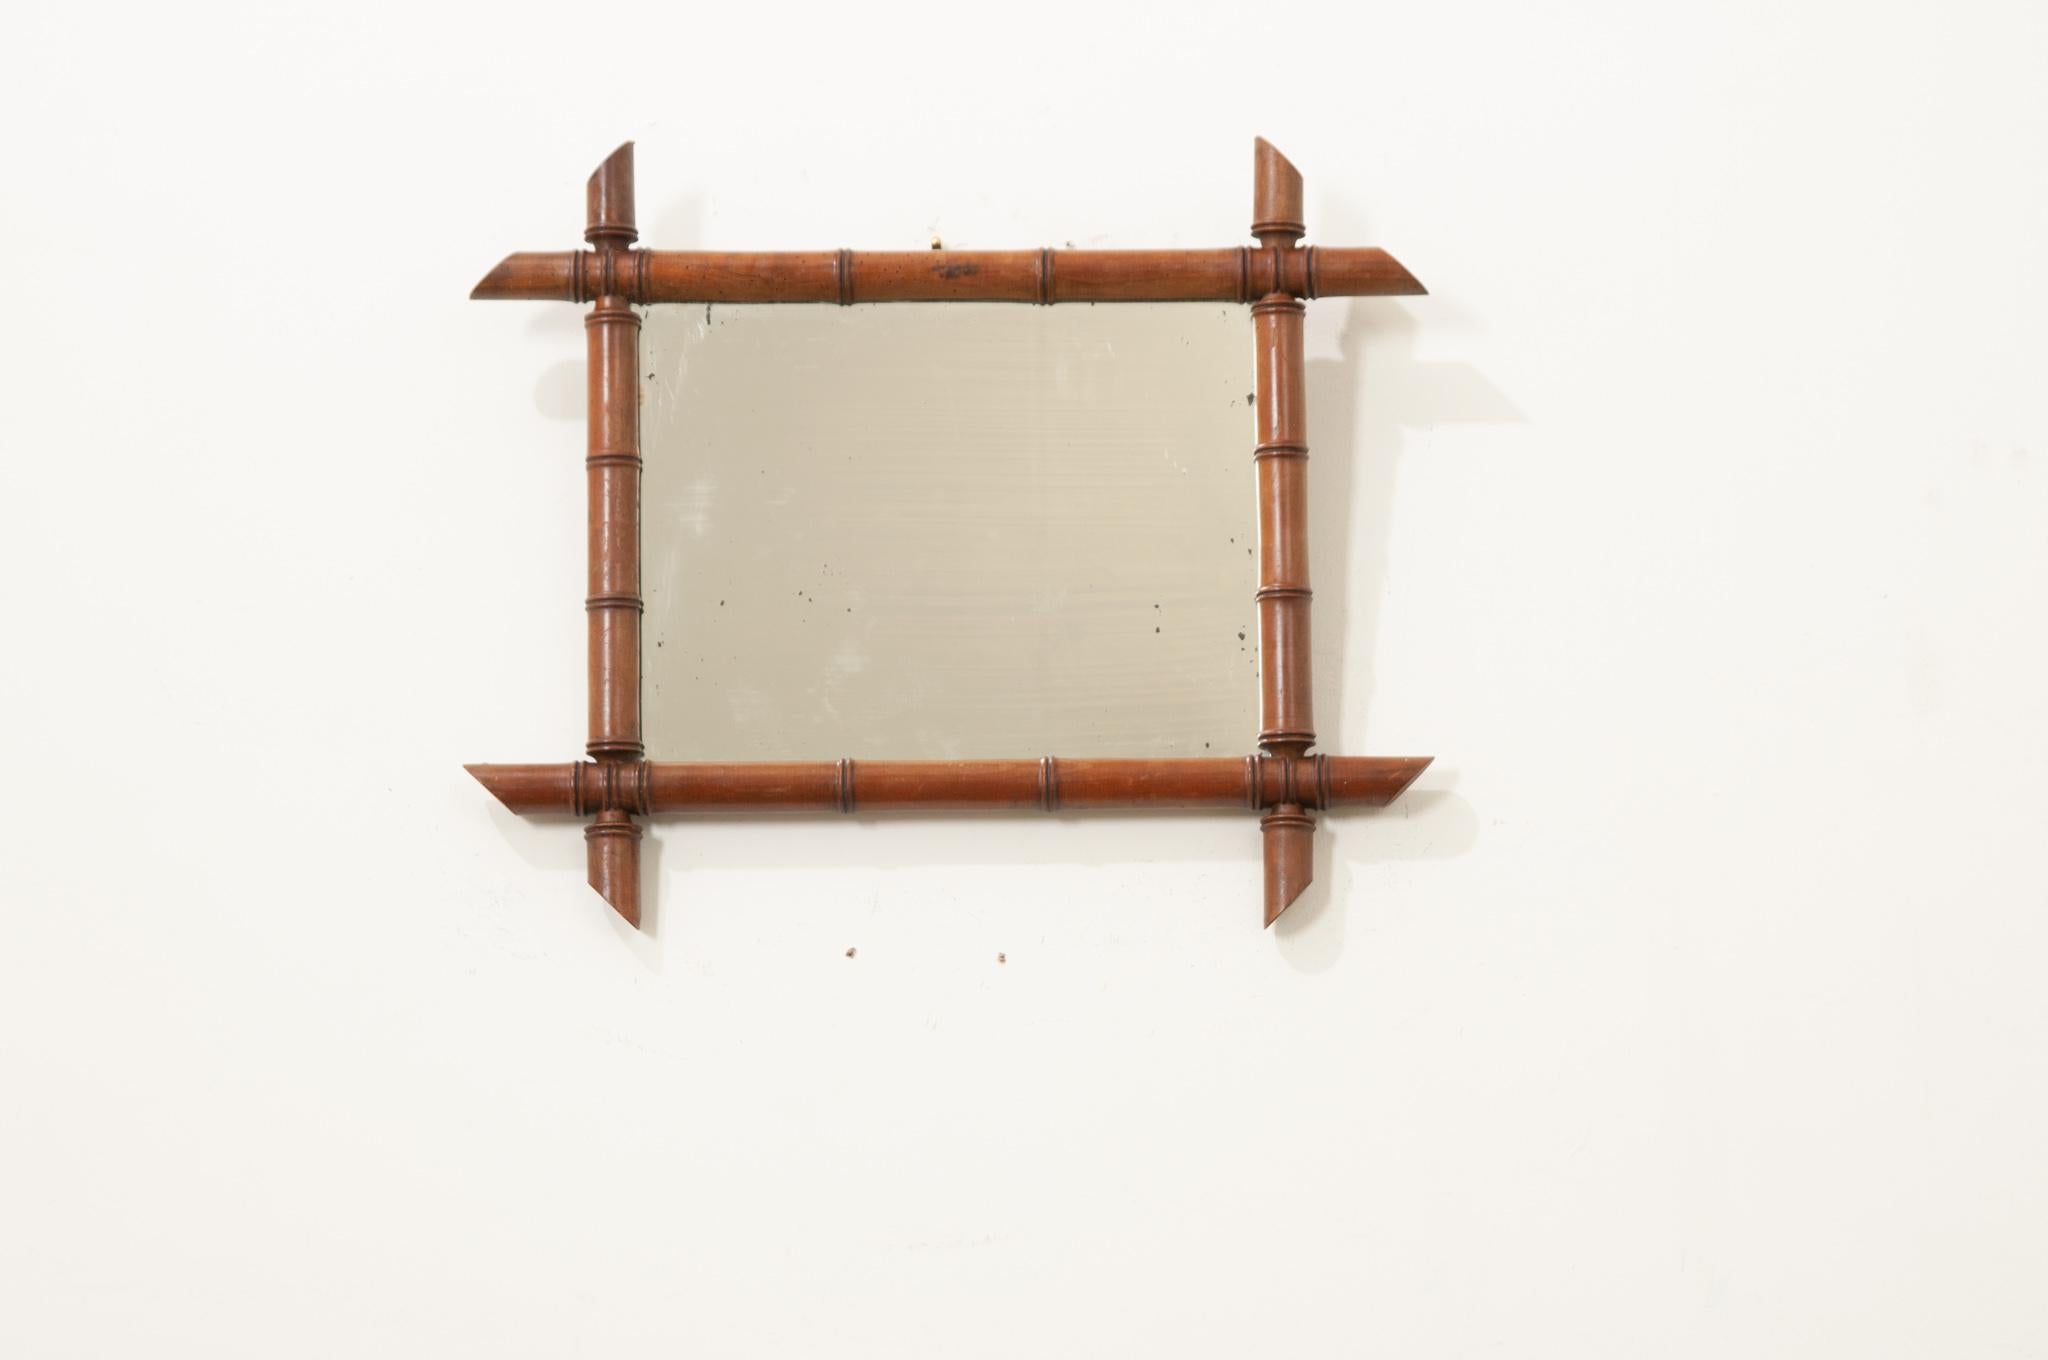 A French vintage rectangular faux-bamboo mirror from the 20th century, with a lovely honey brown patina. This simple mirror features a rectangular Silhouette made of a carved faux bamboo frame showcasing intersecting corners. This mirror charms us